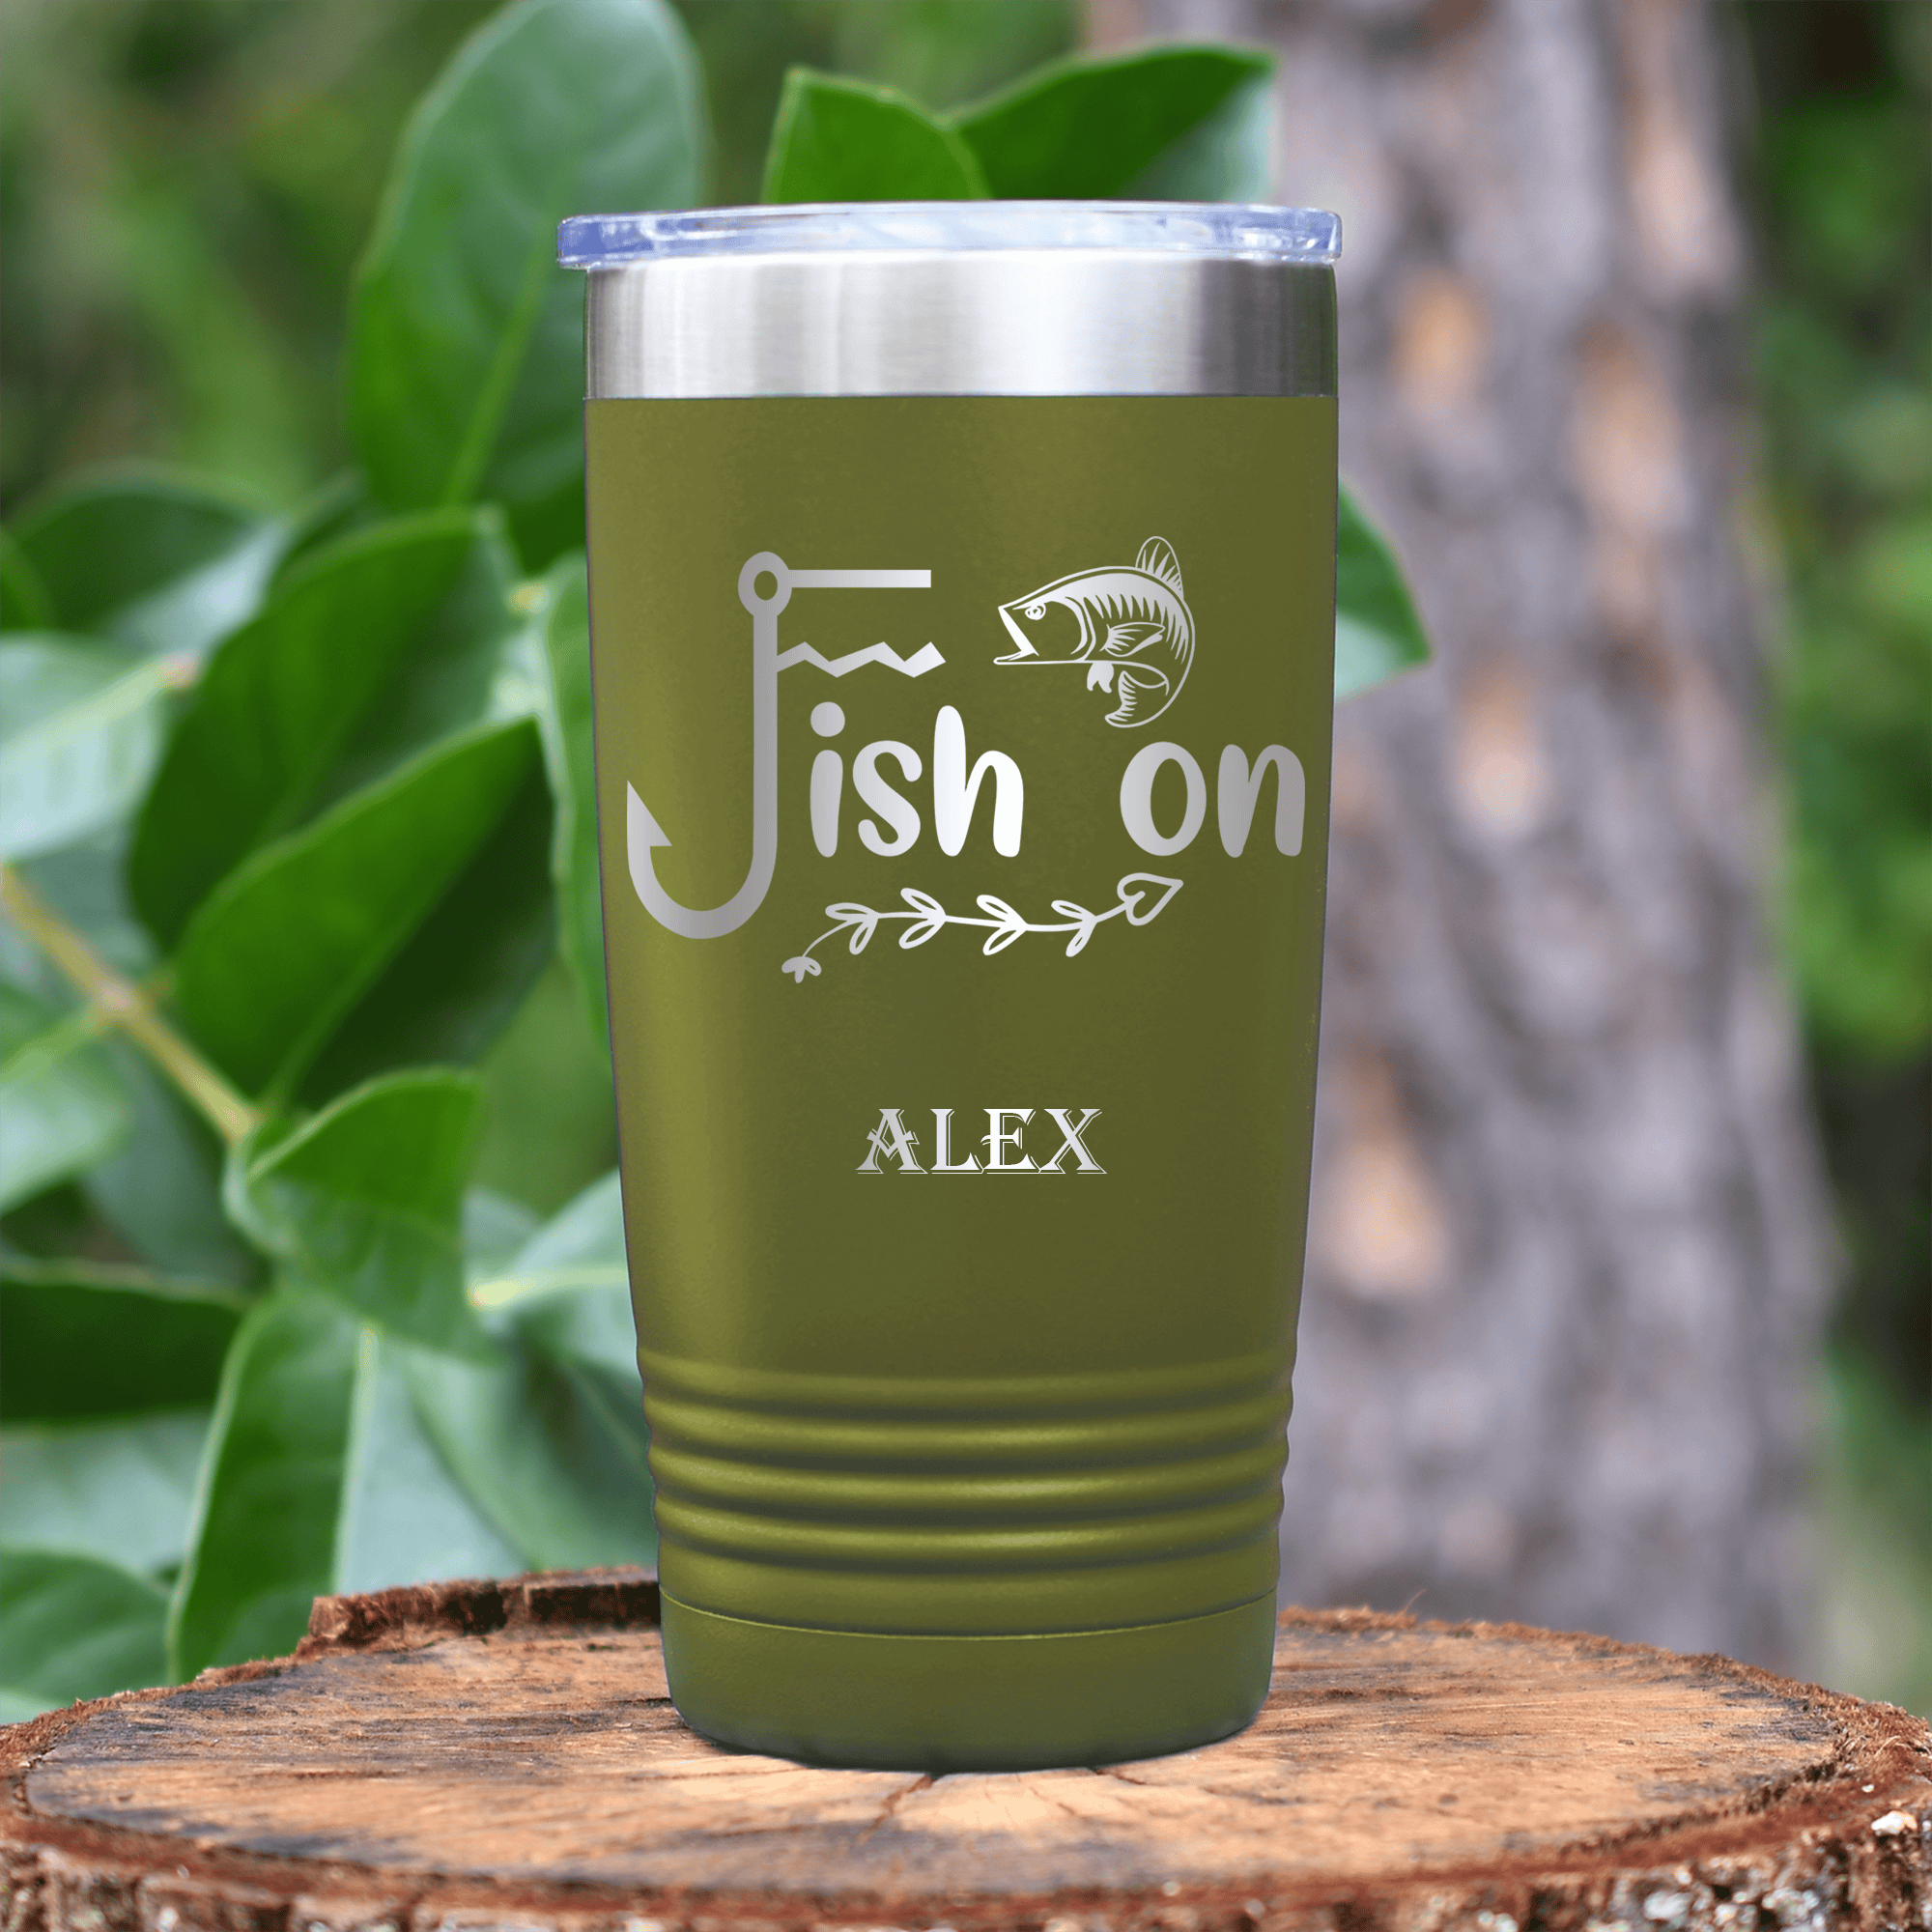 Fishing Tumbler With Fish On Design - Groovy Guy Gifts